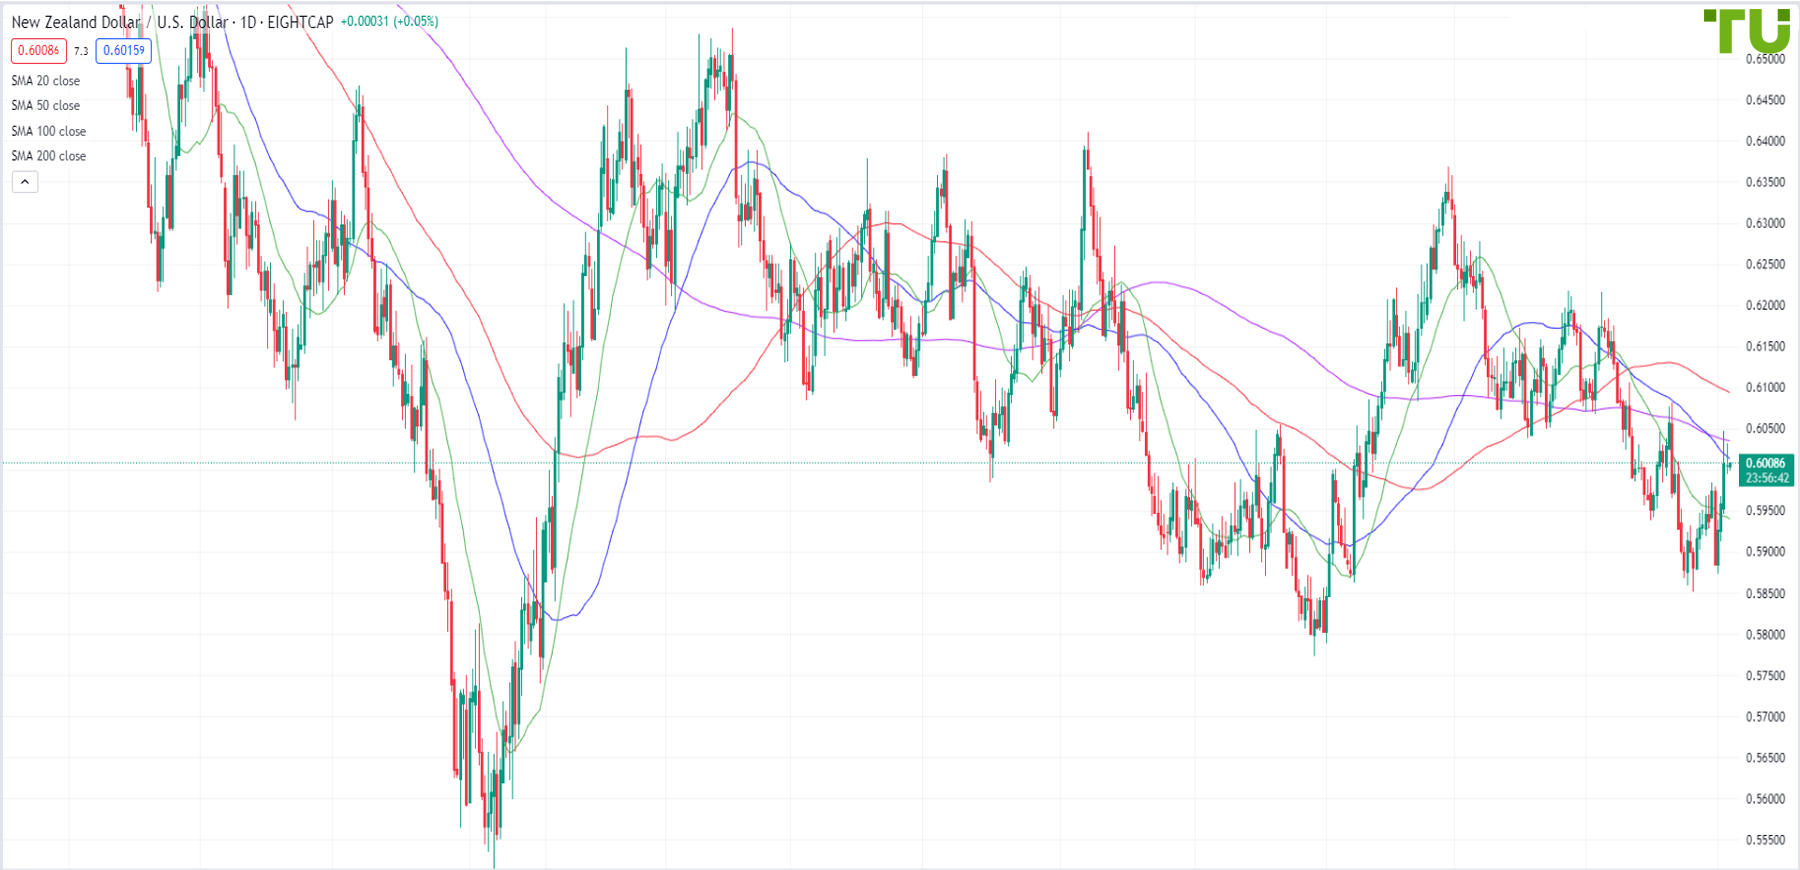 NZD/USD tries to hold above 0.6000